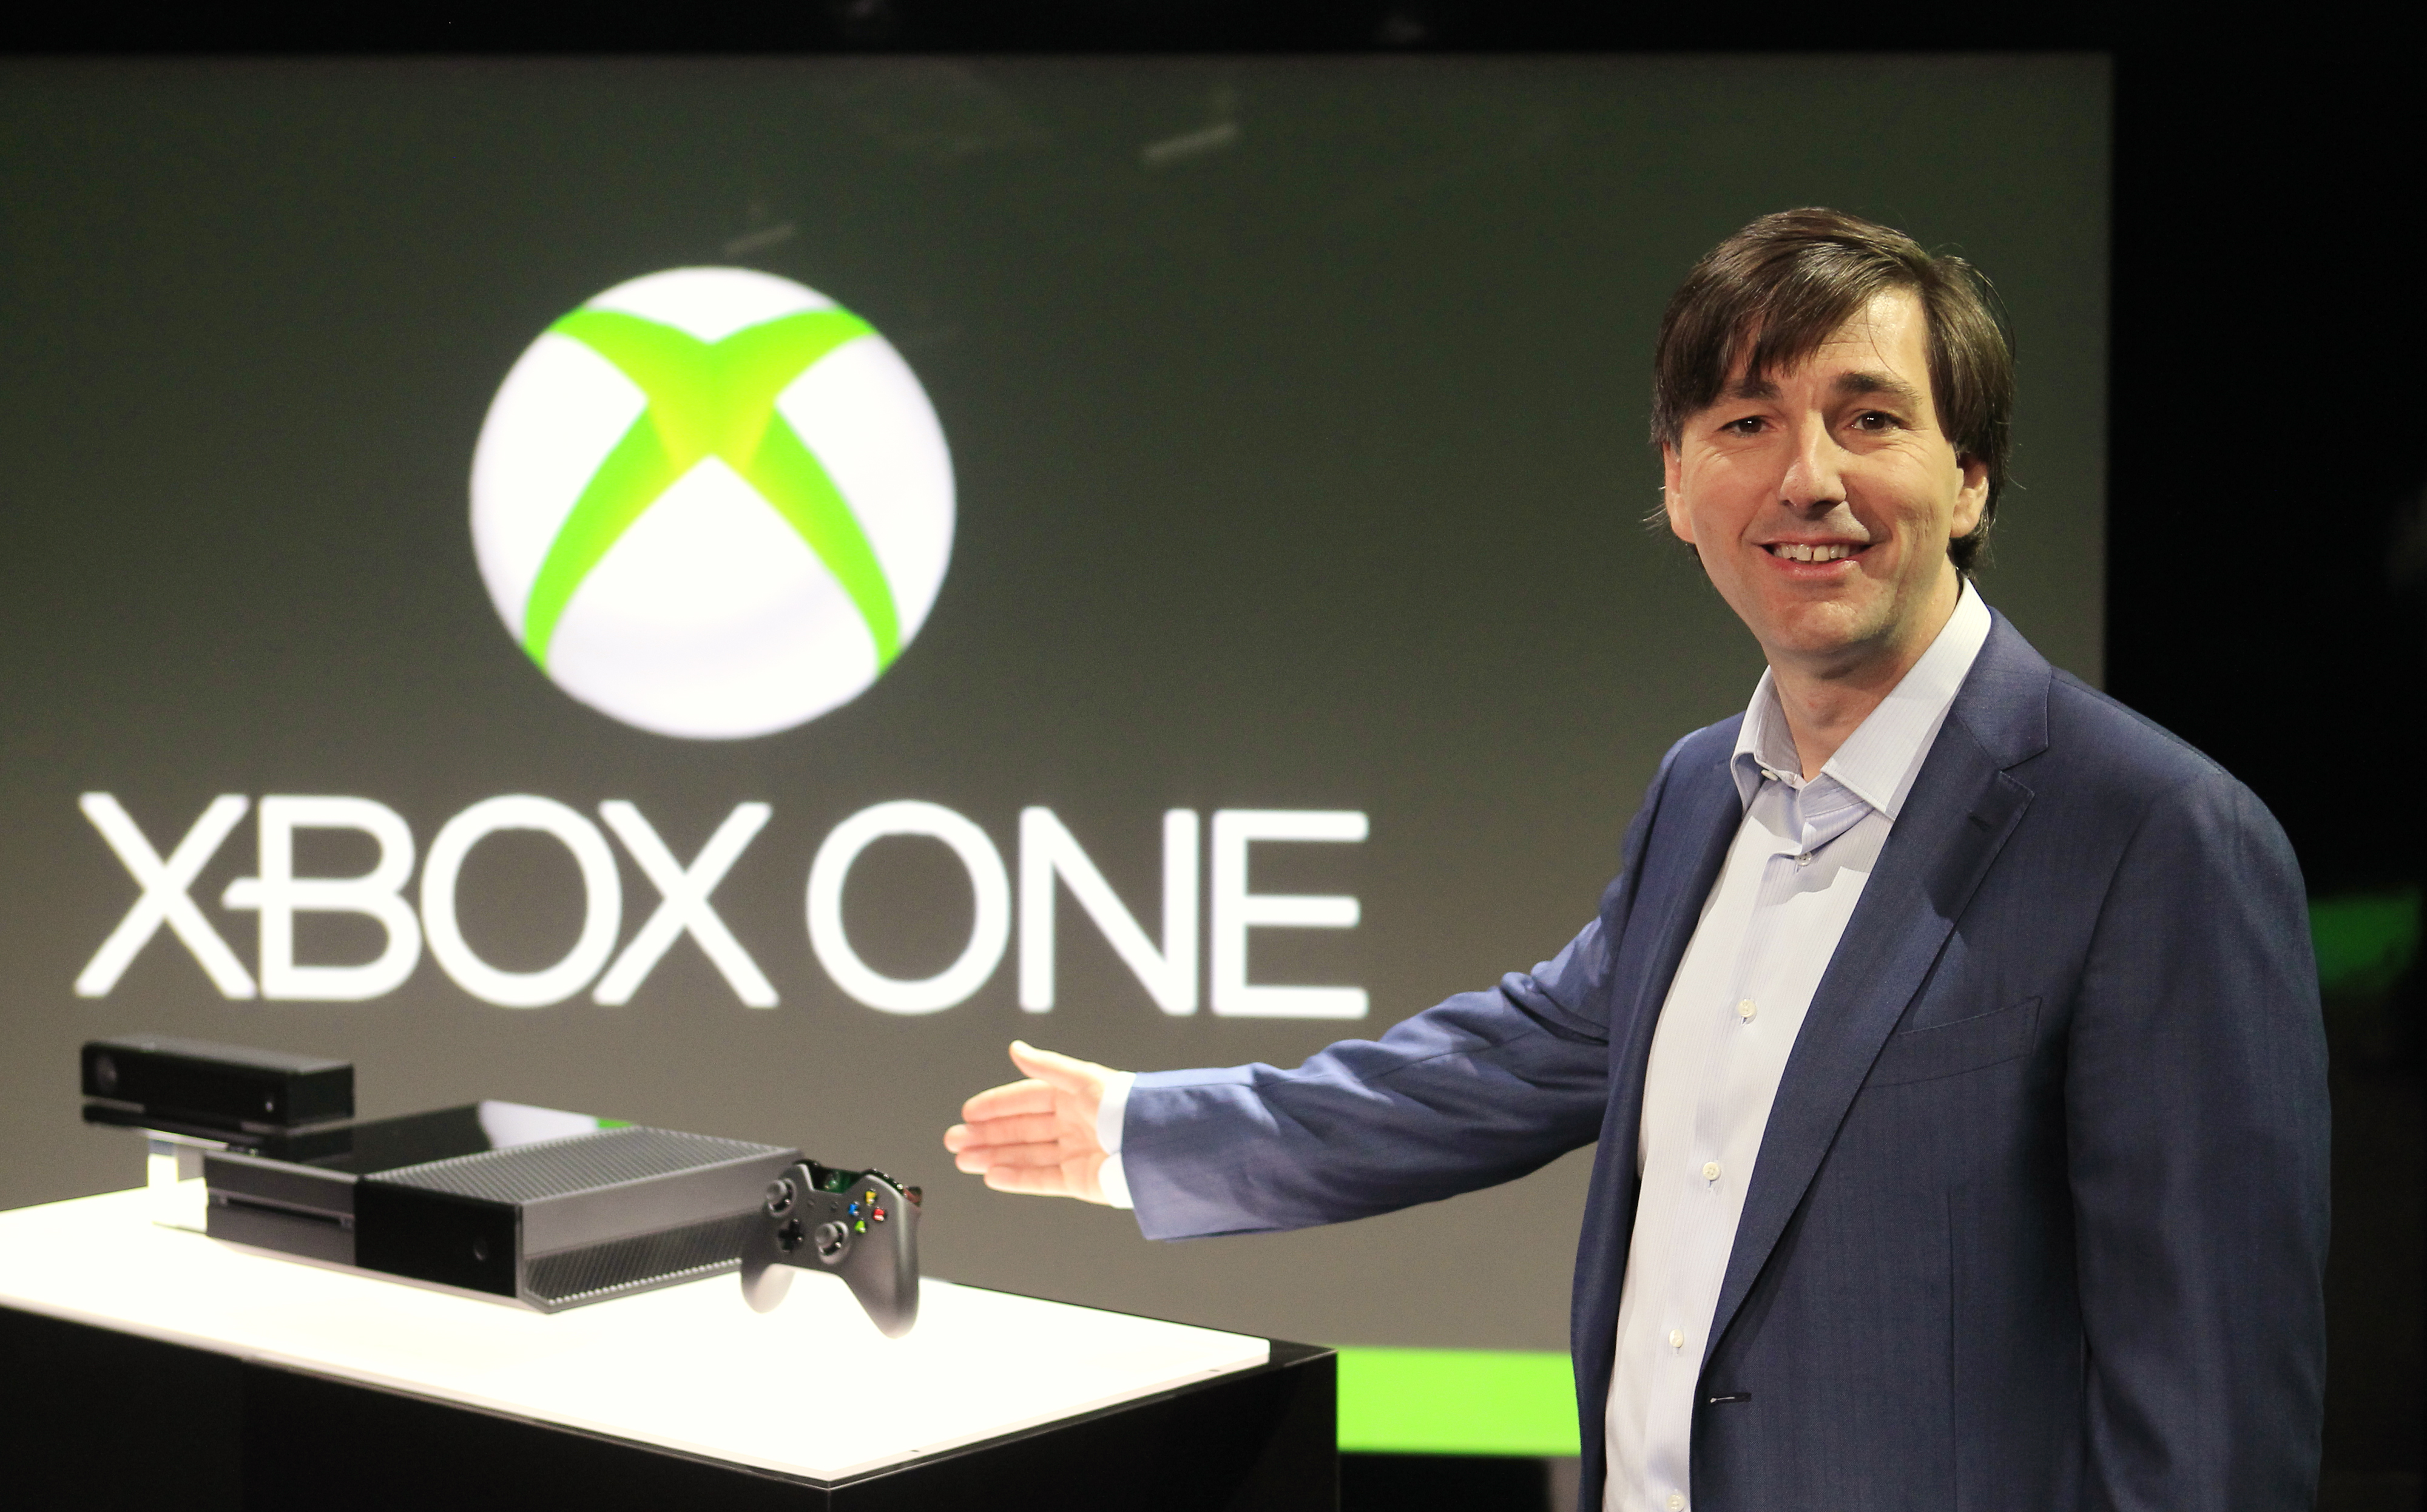 Don Mattrick shows off the Xbox One